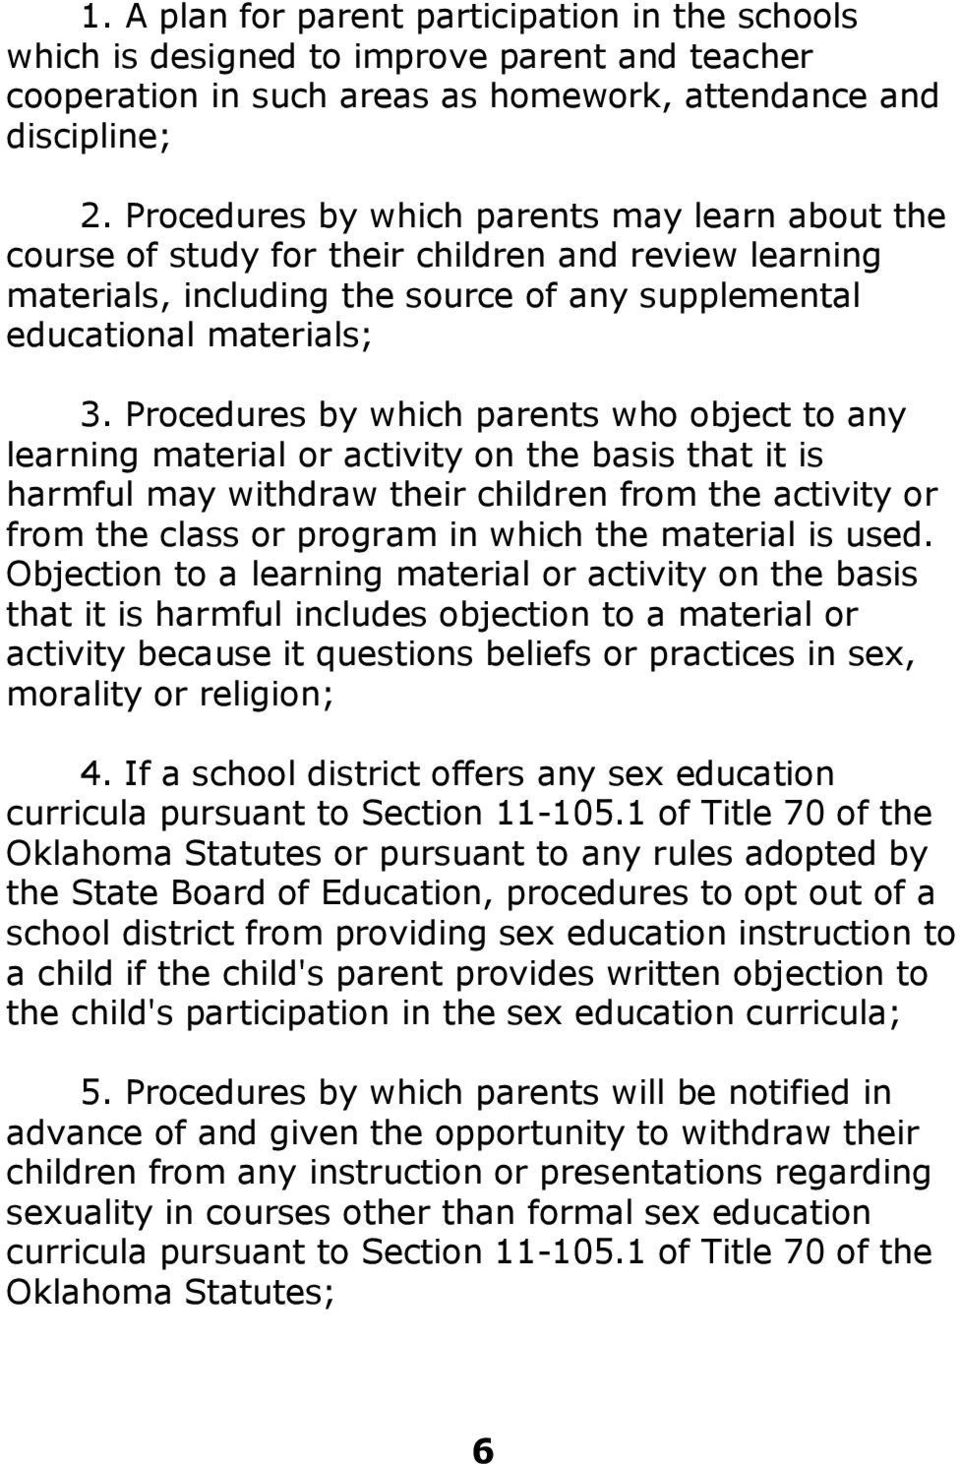 Procedures by which parents who object to any learning material or activity on the basis that it is harmful may withdraw their children from the activity or from the class or program in which the